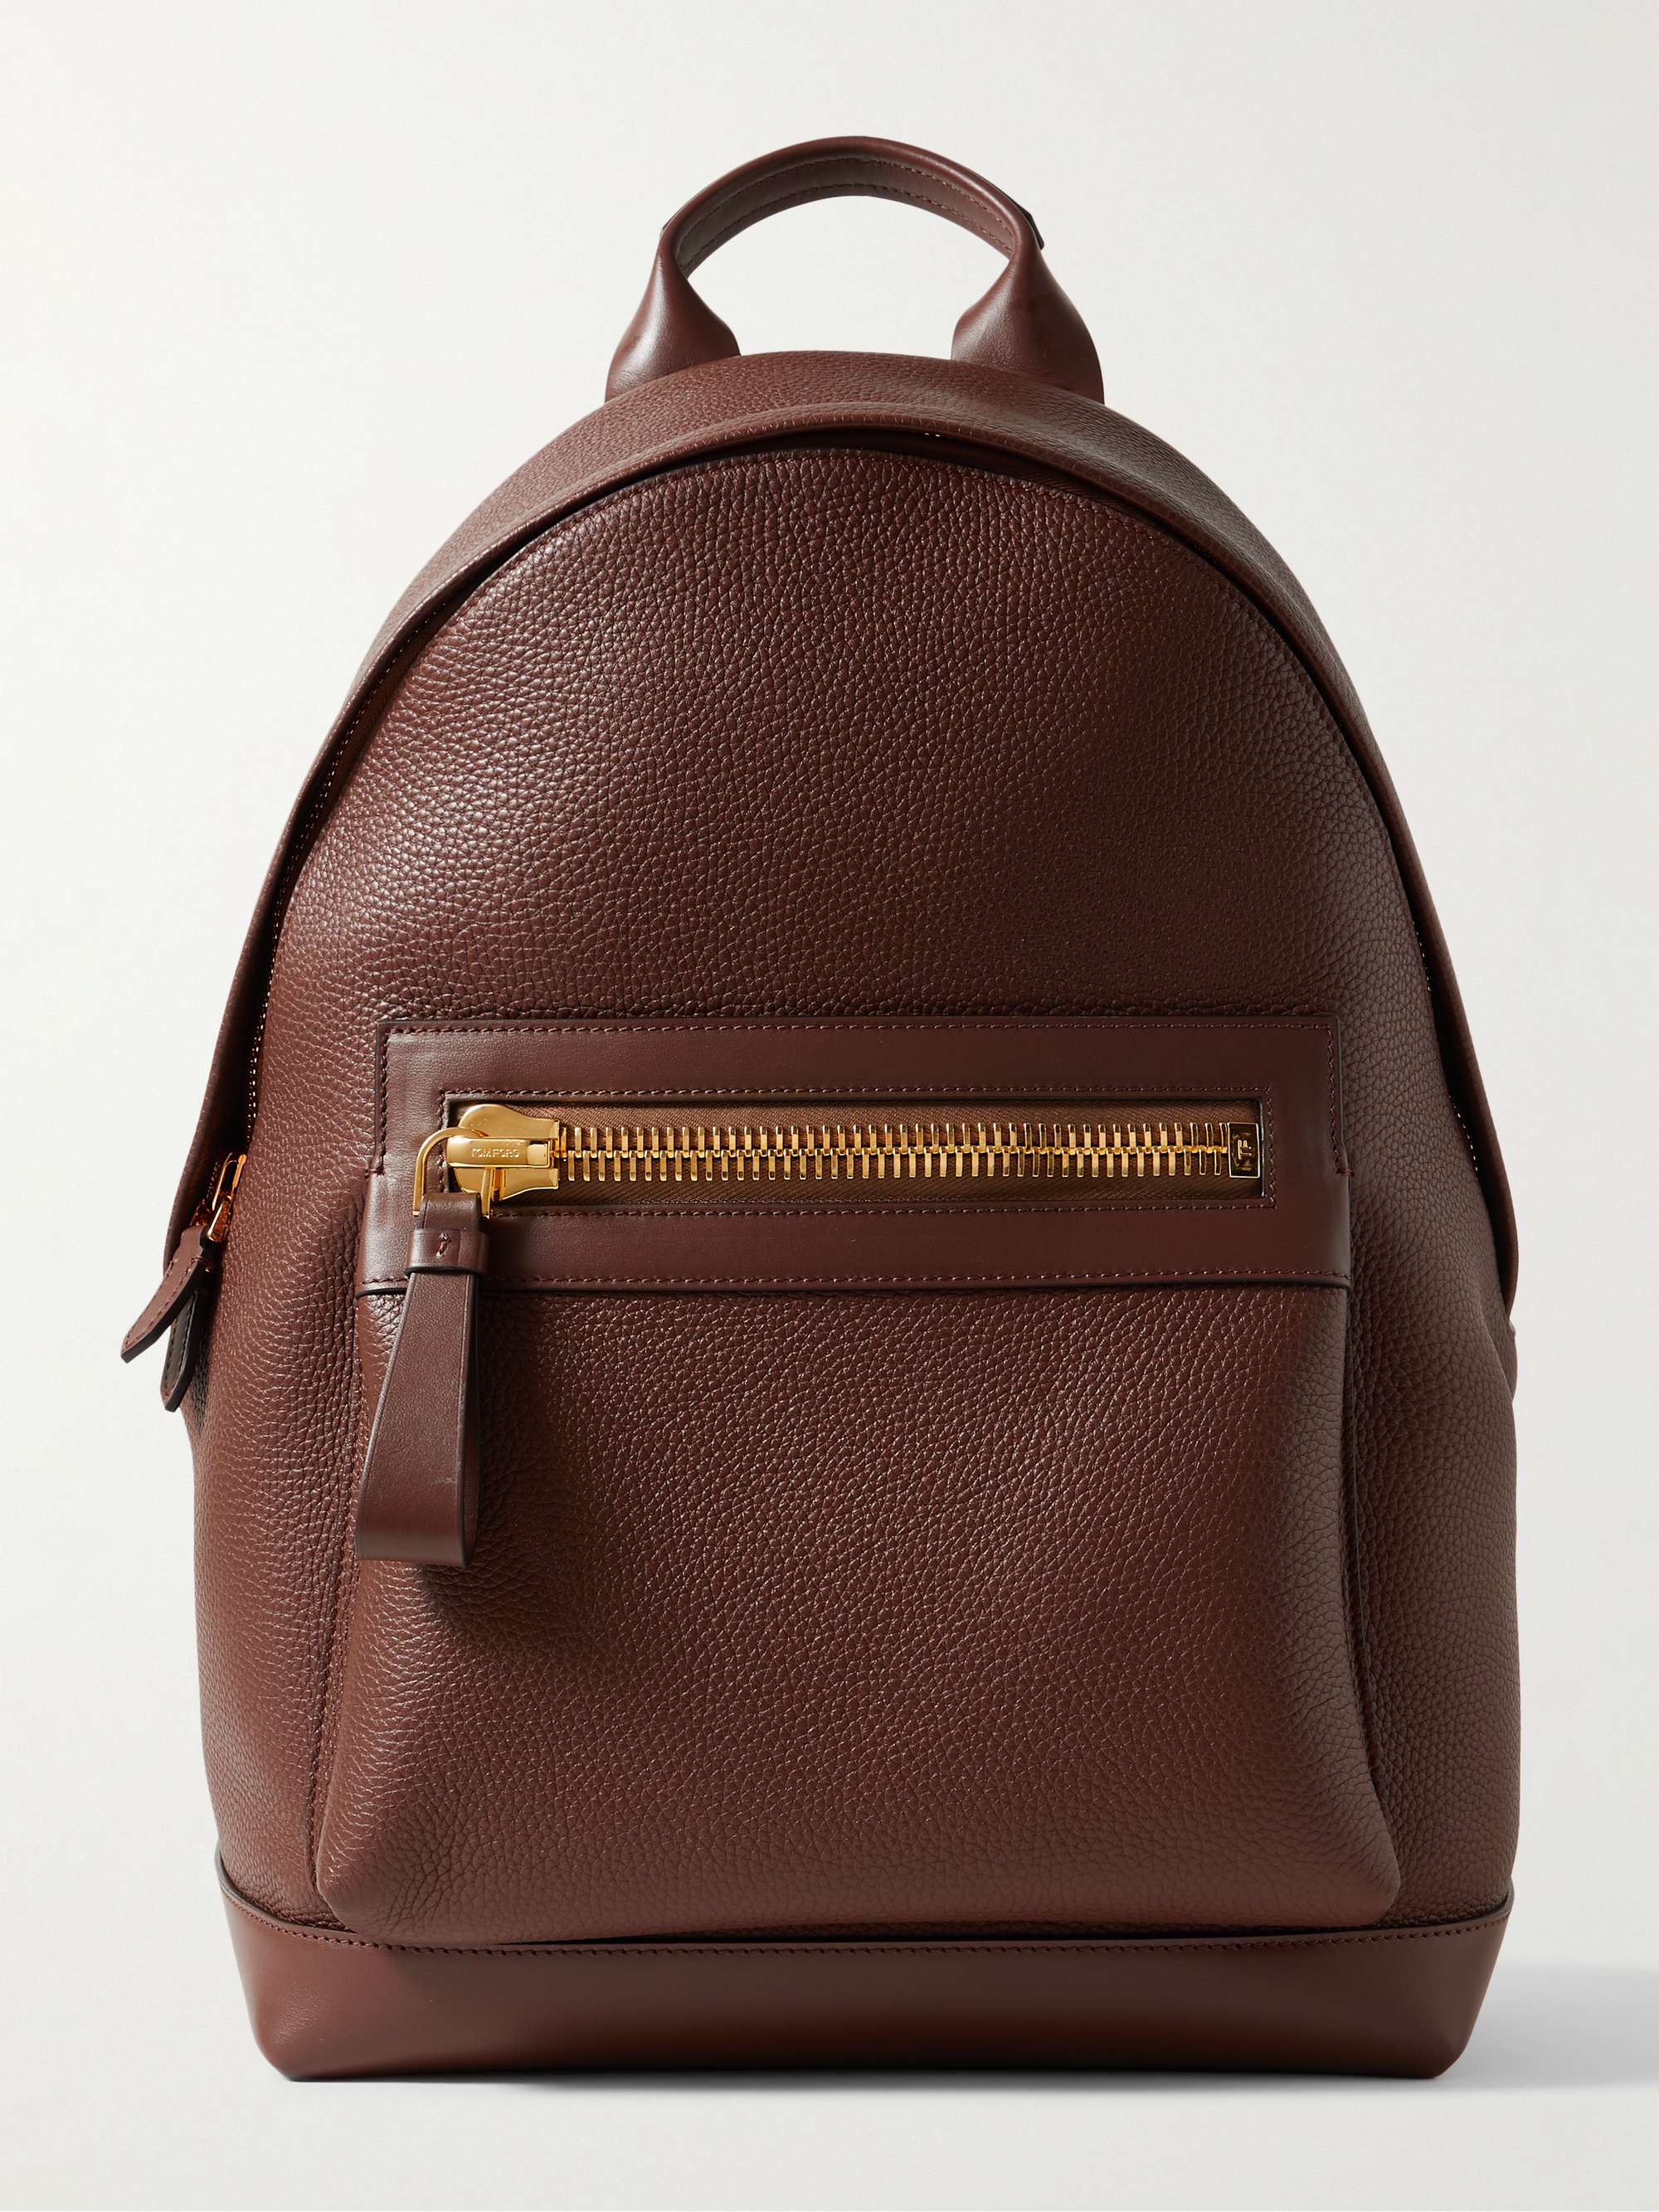 TOM FORD Buckley Pebble-Grain Leather Backpack